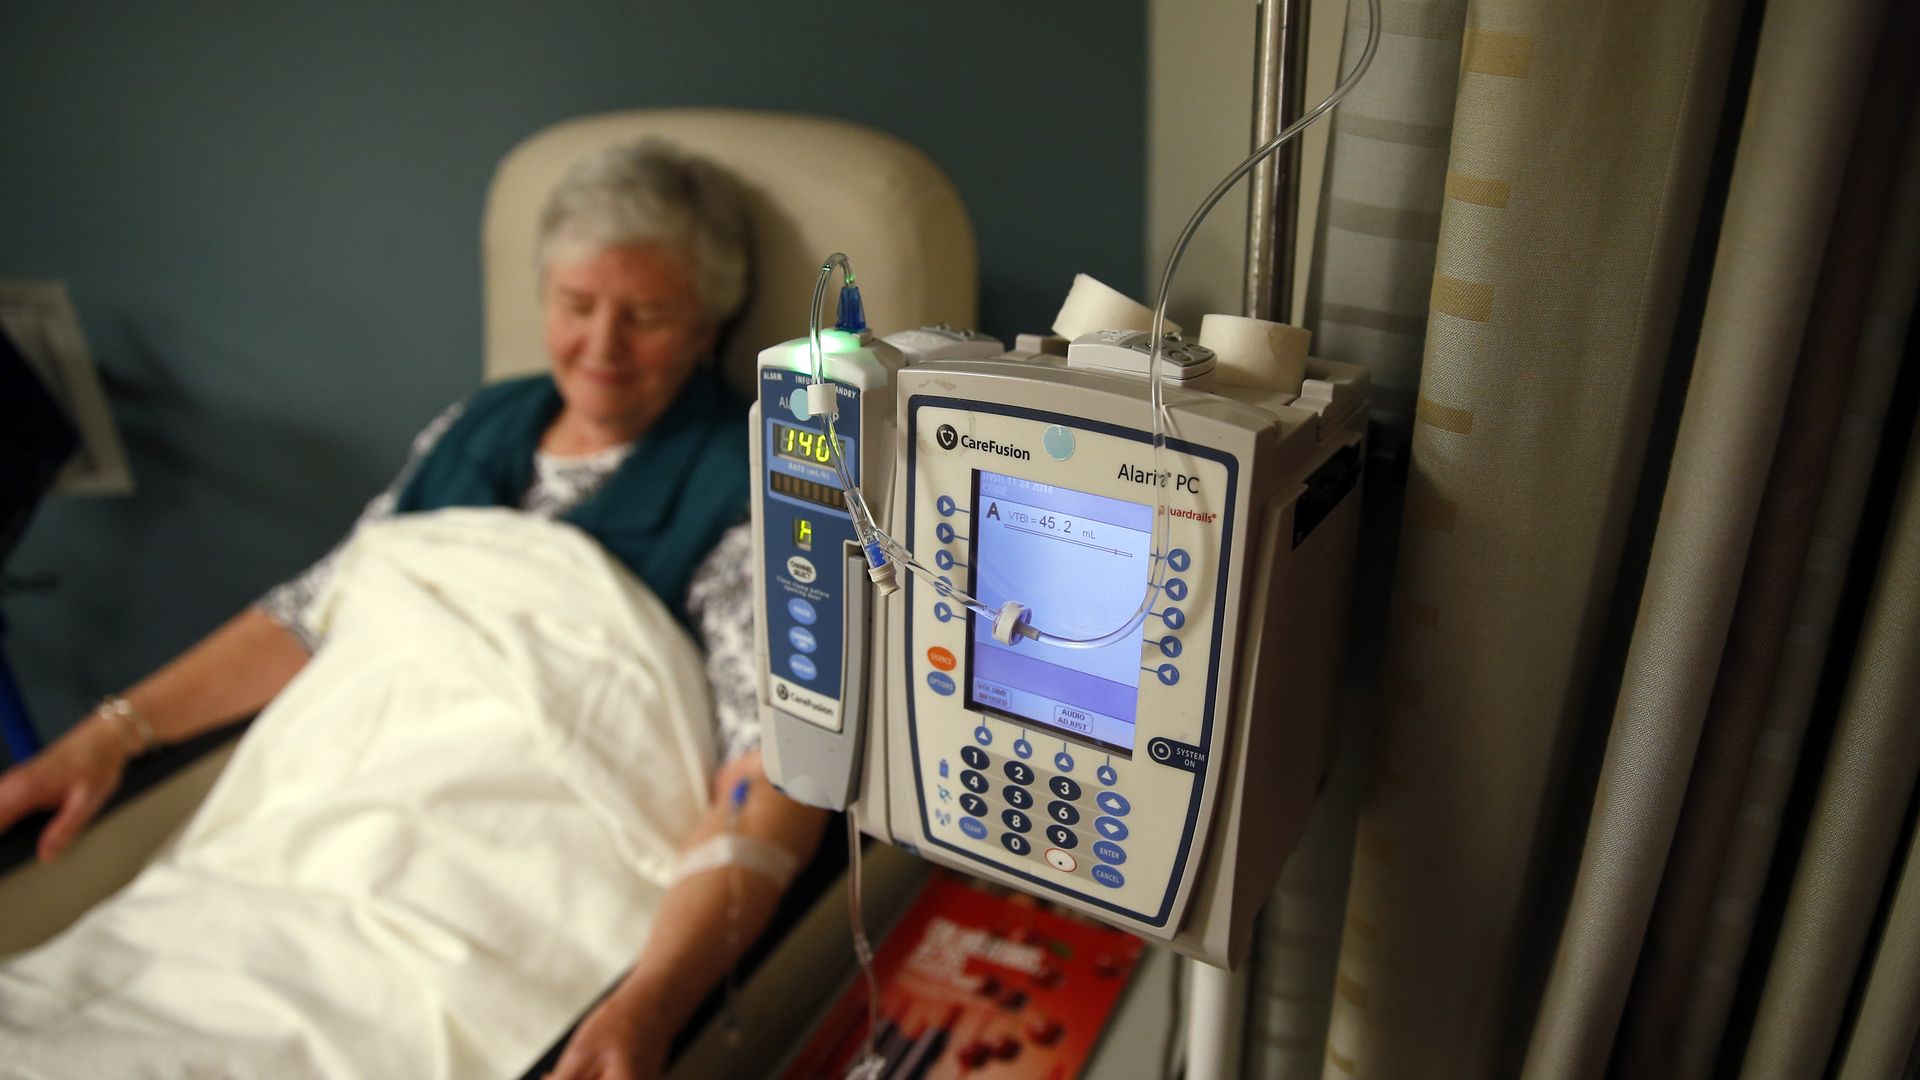 A patient gets her medication intravenously at a hospital.